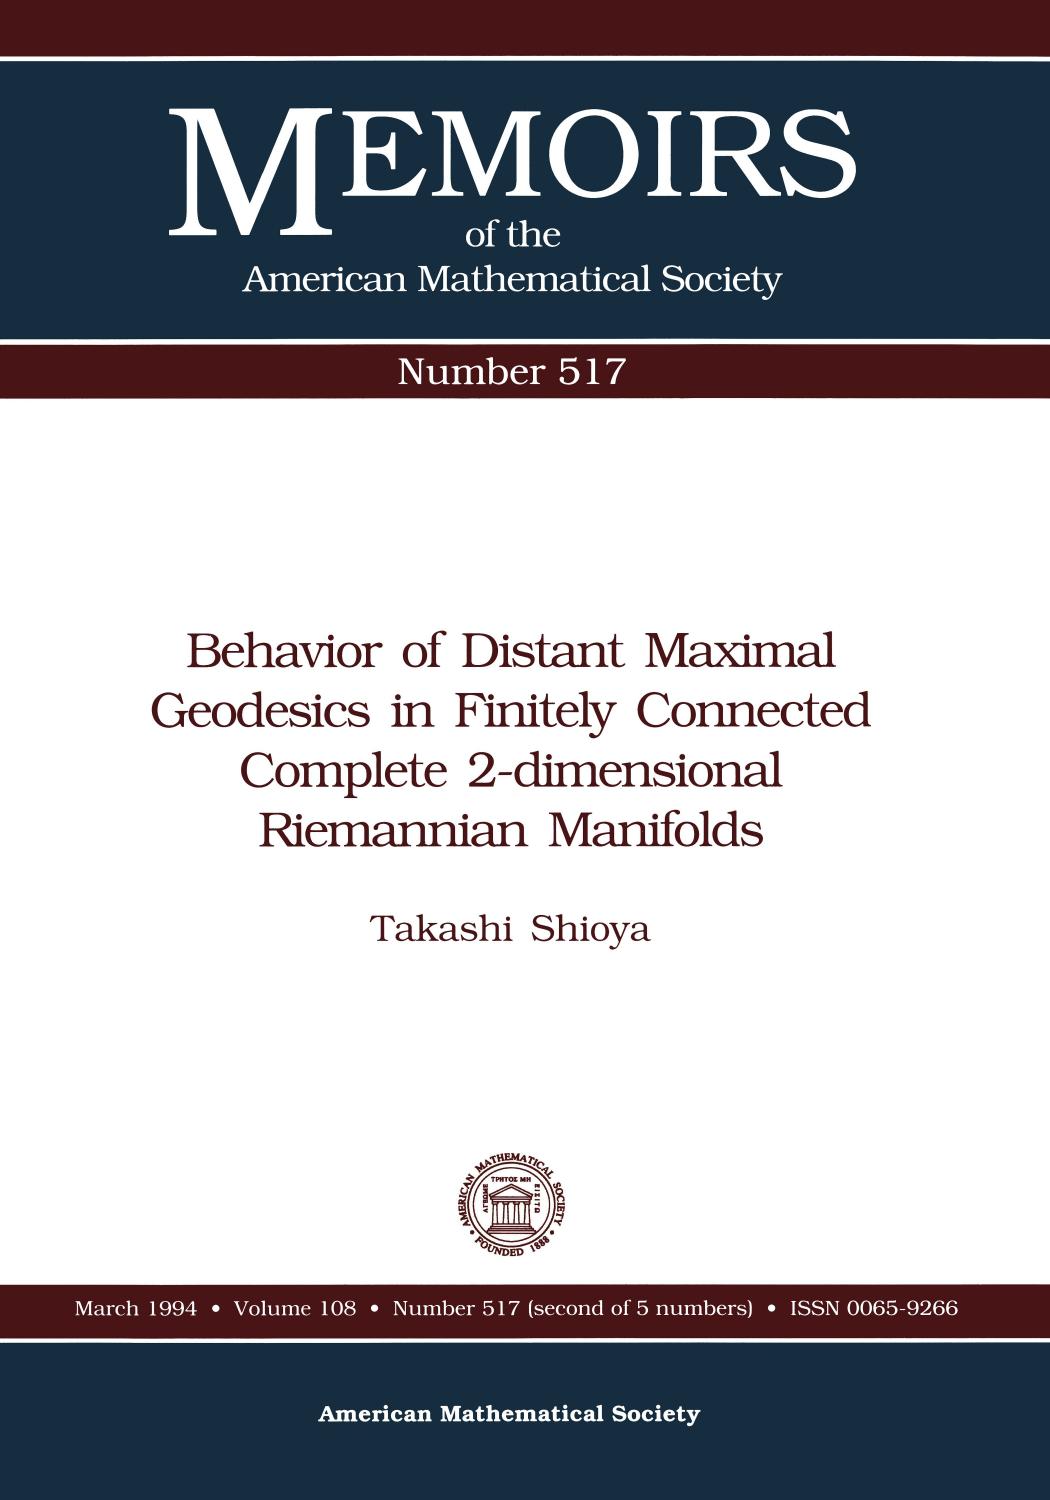 Behavior of Distant Maximal Geodesics in Finitely Connected Complete 2-Dimensional Riemannian Manifolds